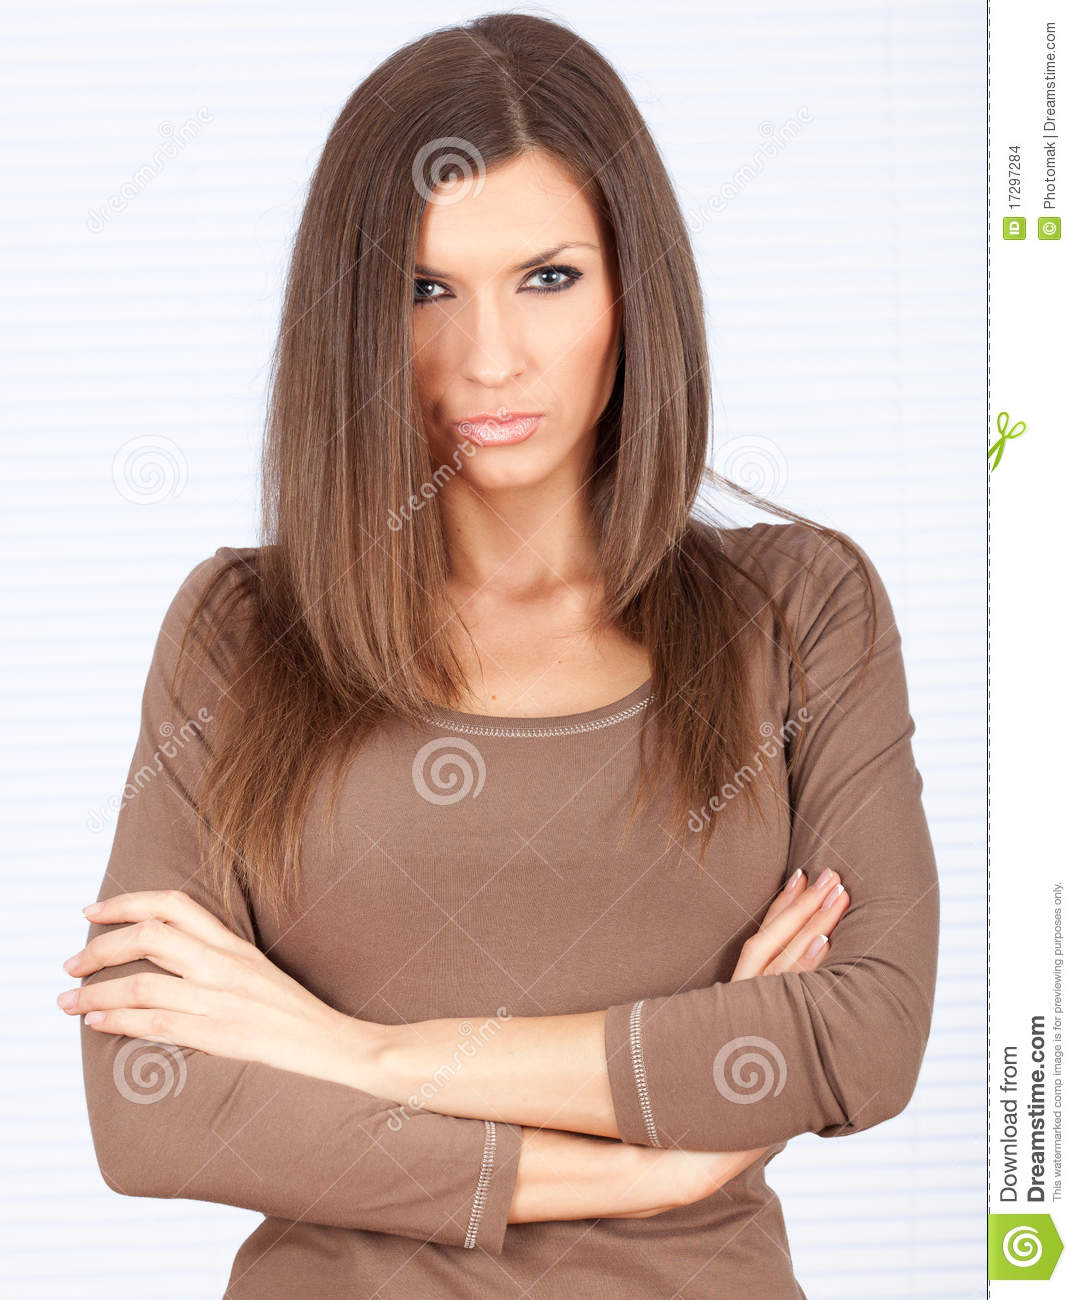 Woman with Arms Crossed Angry